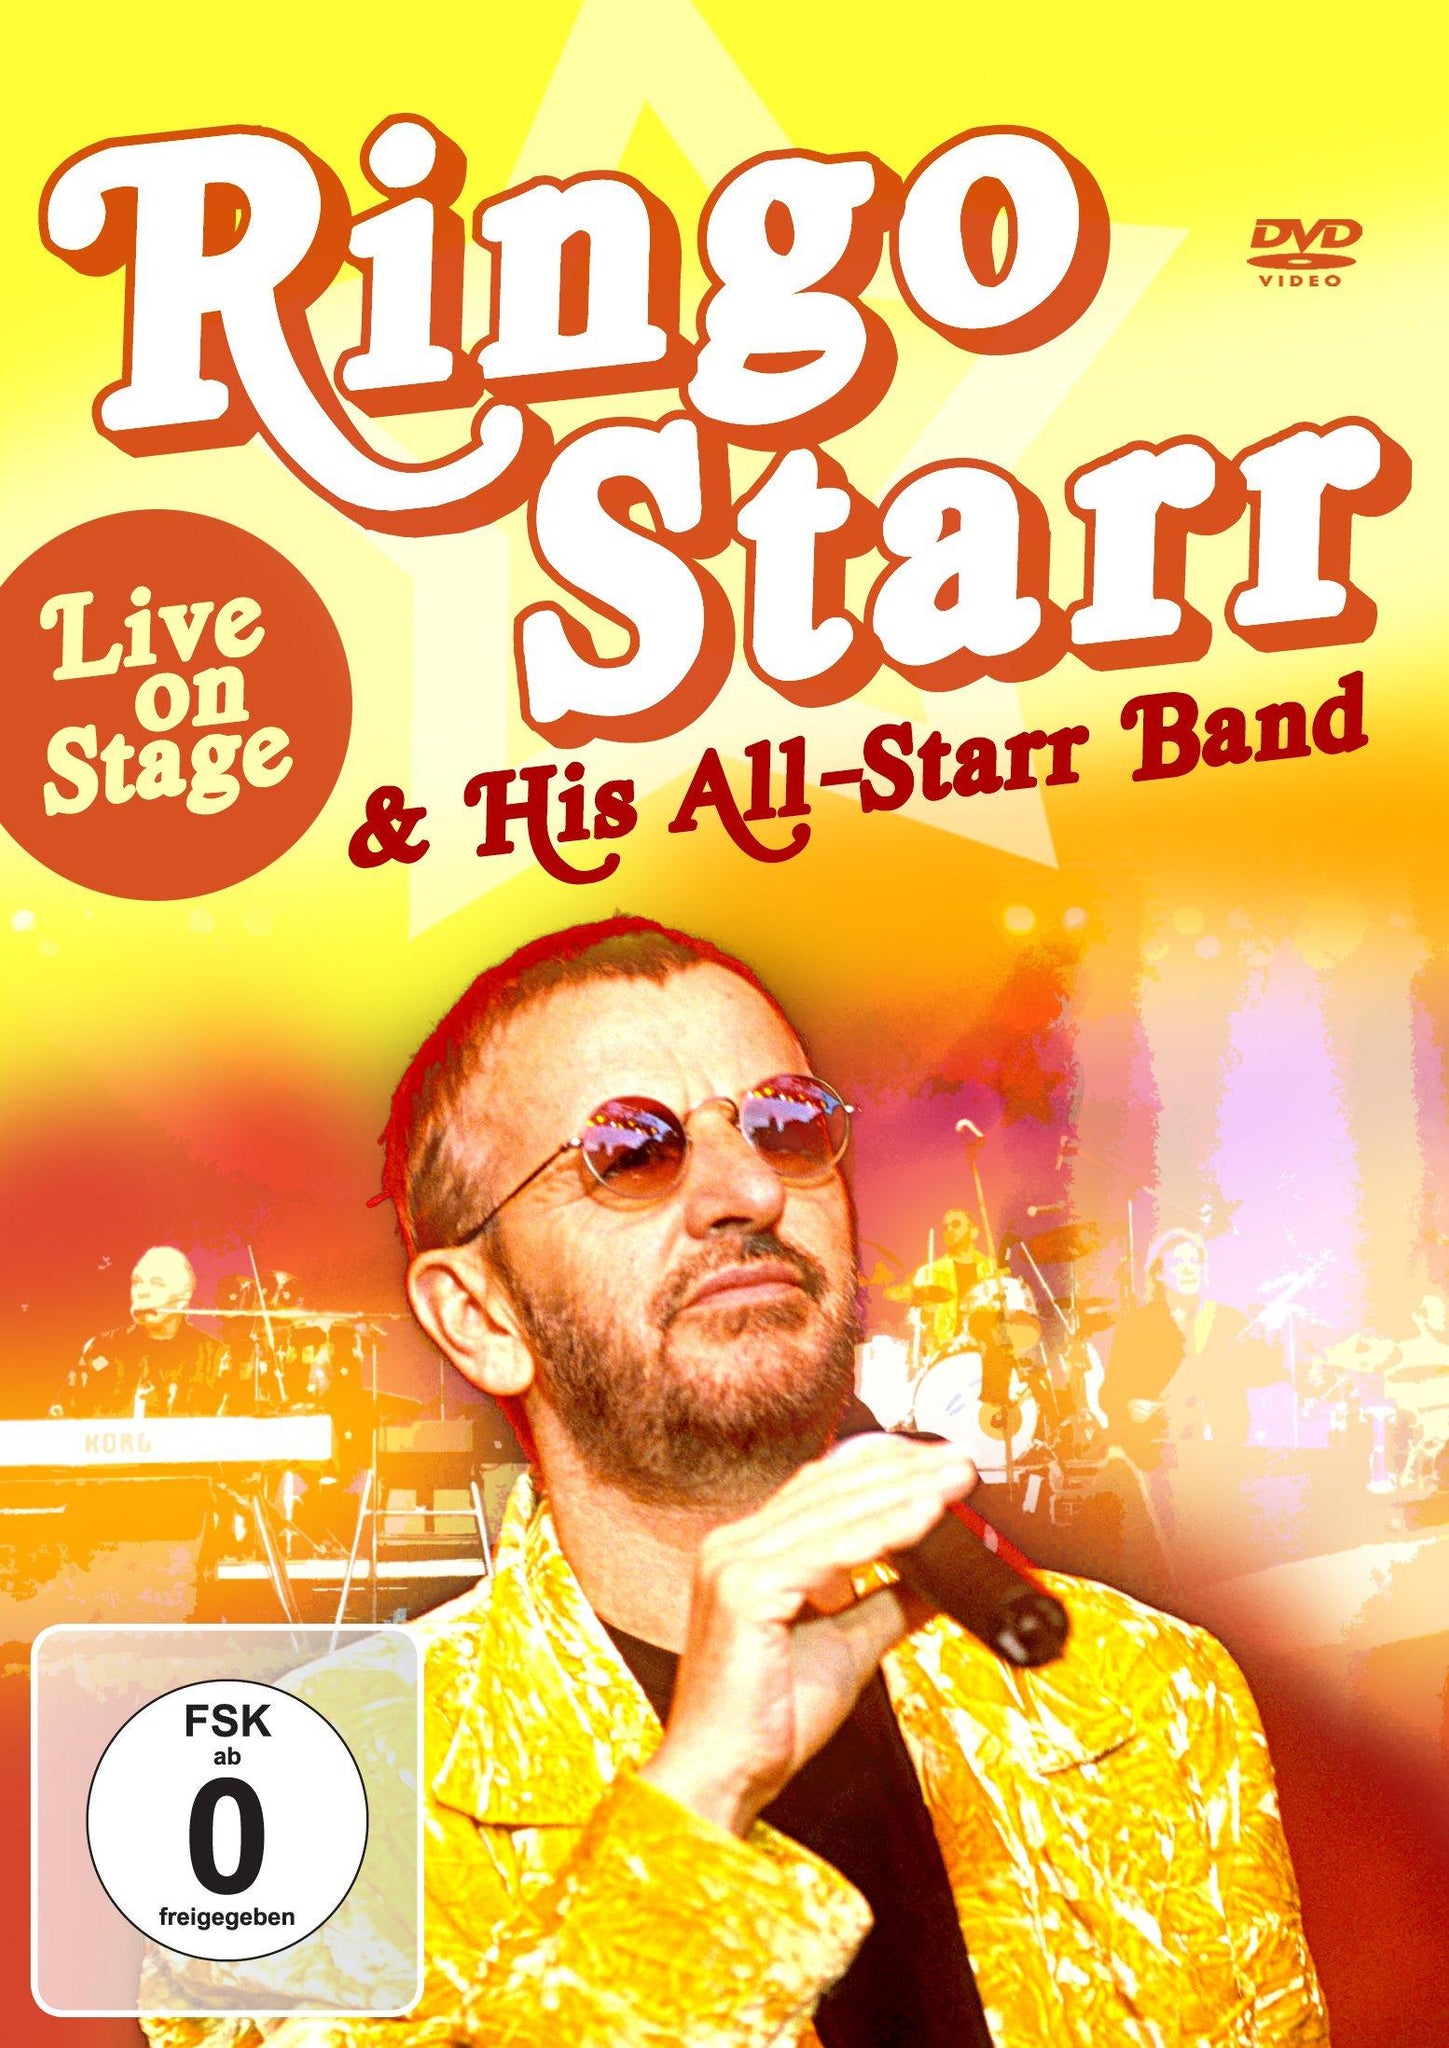 Ringo & His All-starr Band Starr - Live on Stage